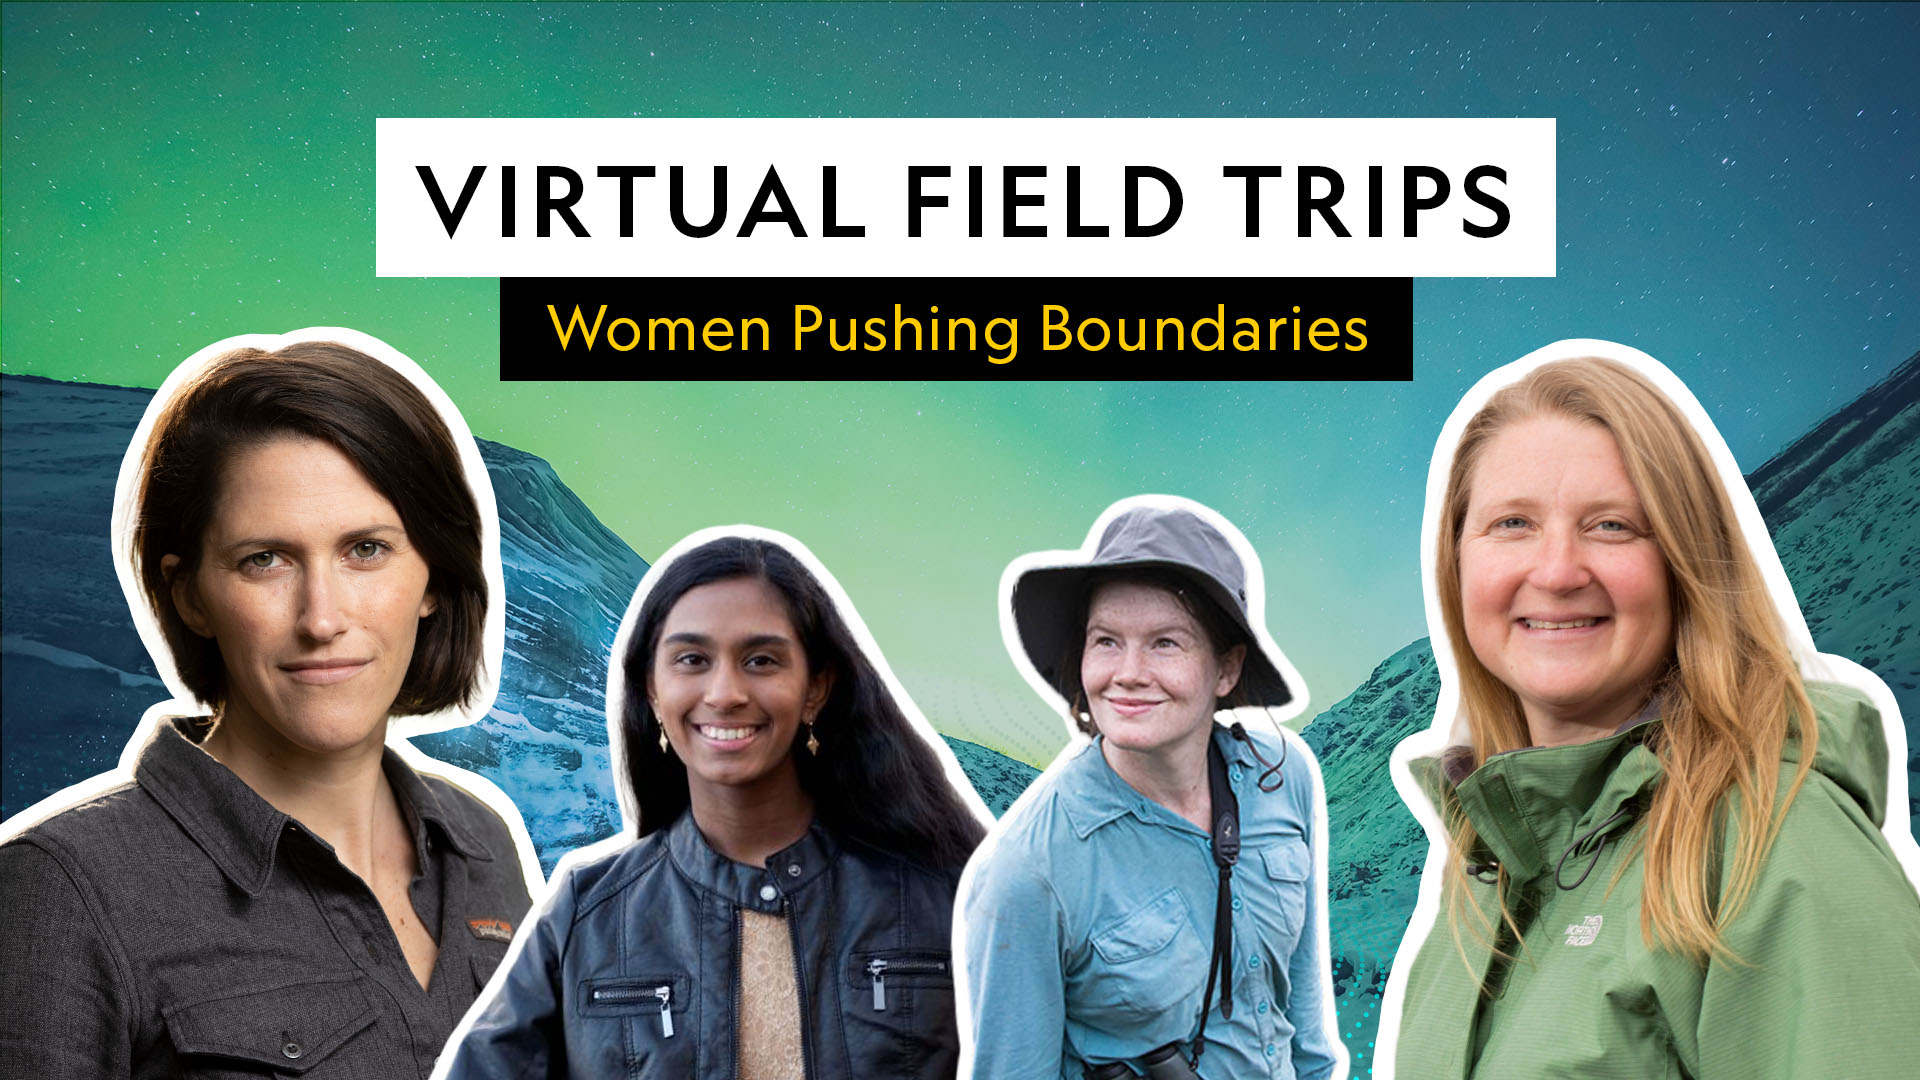 virtual field trips and world tours